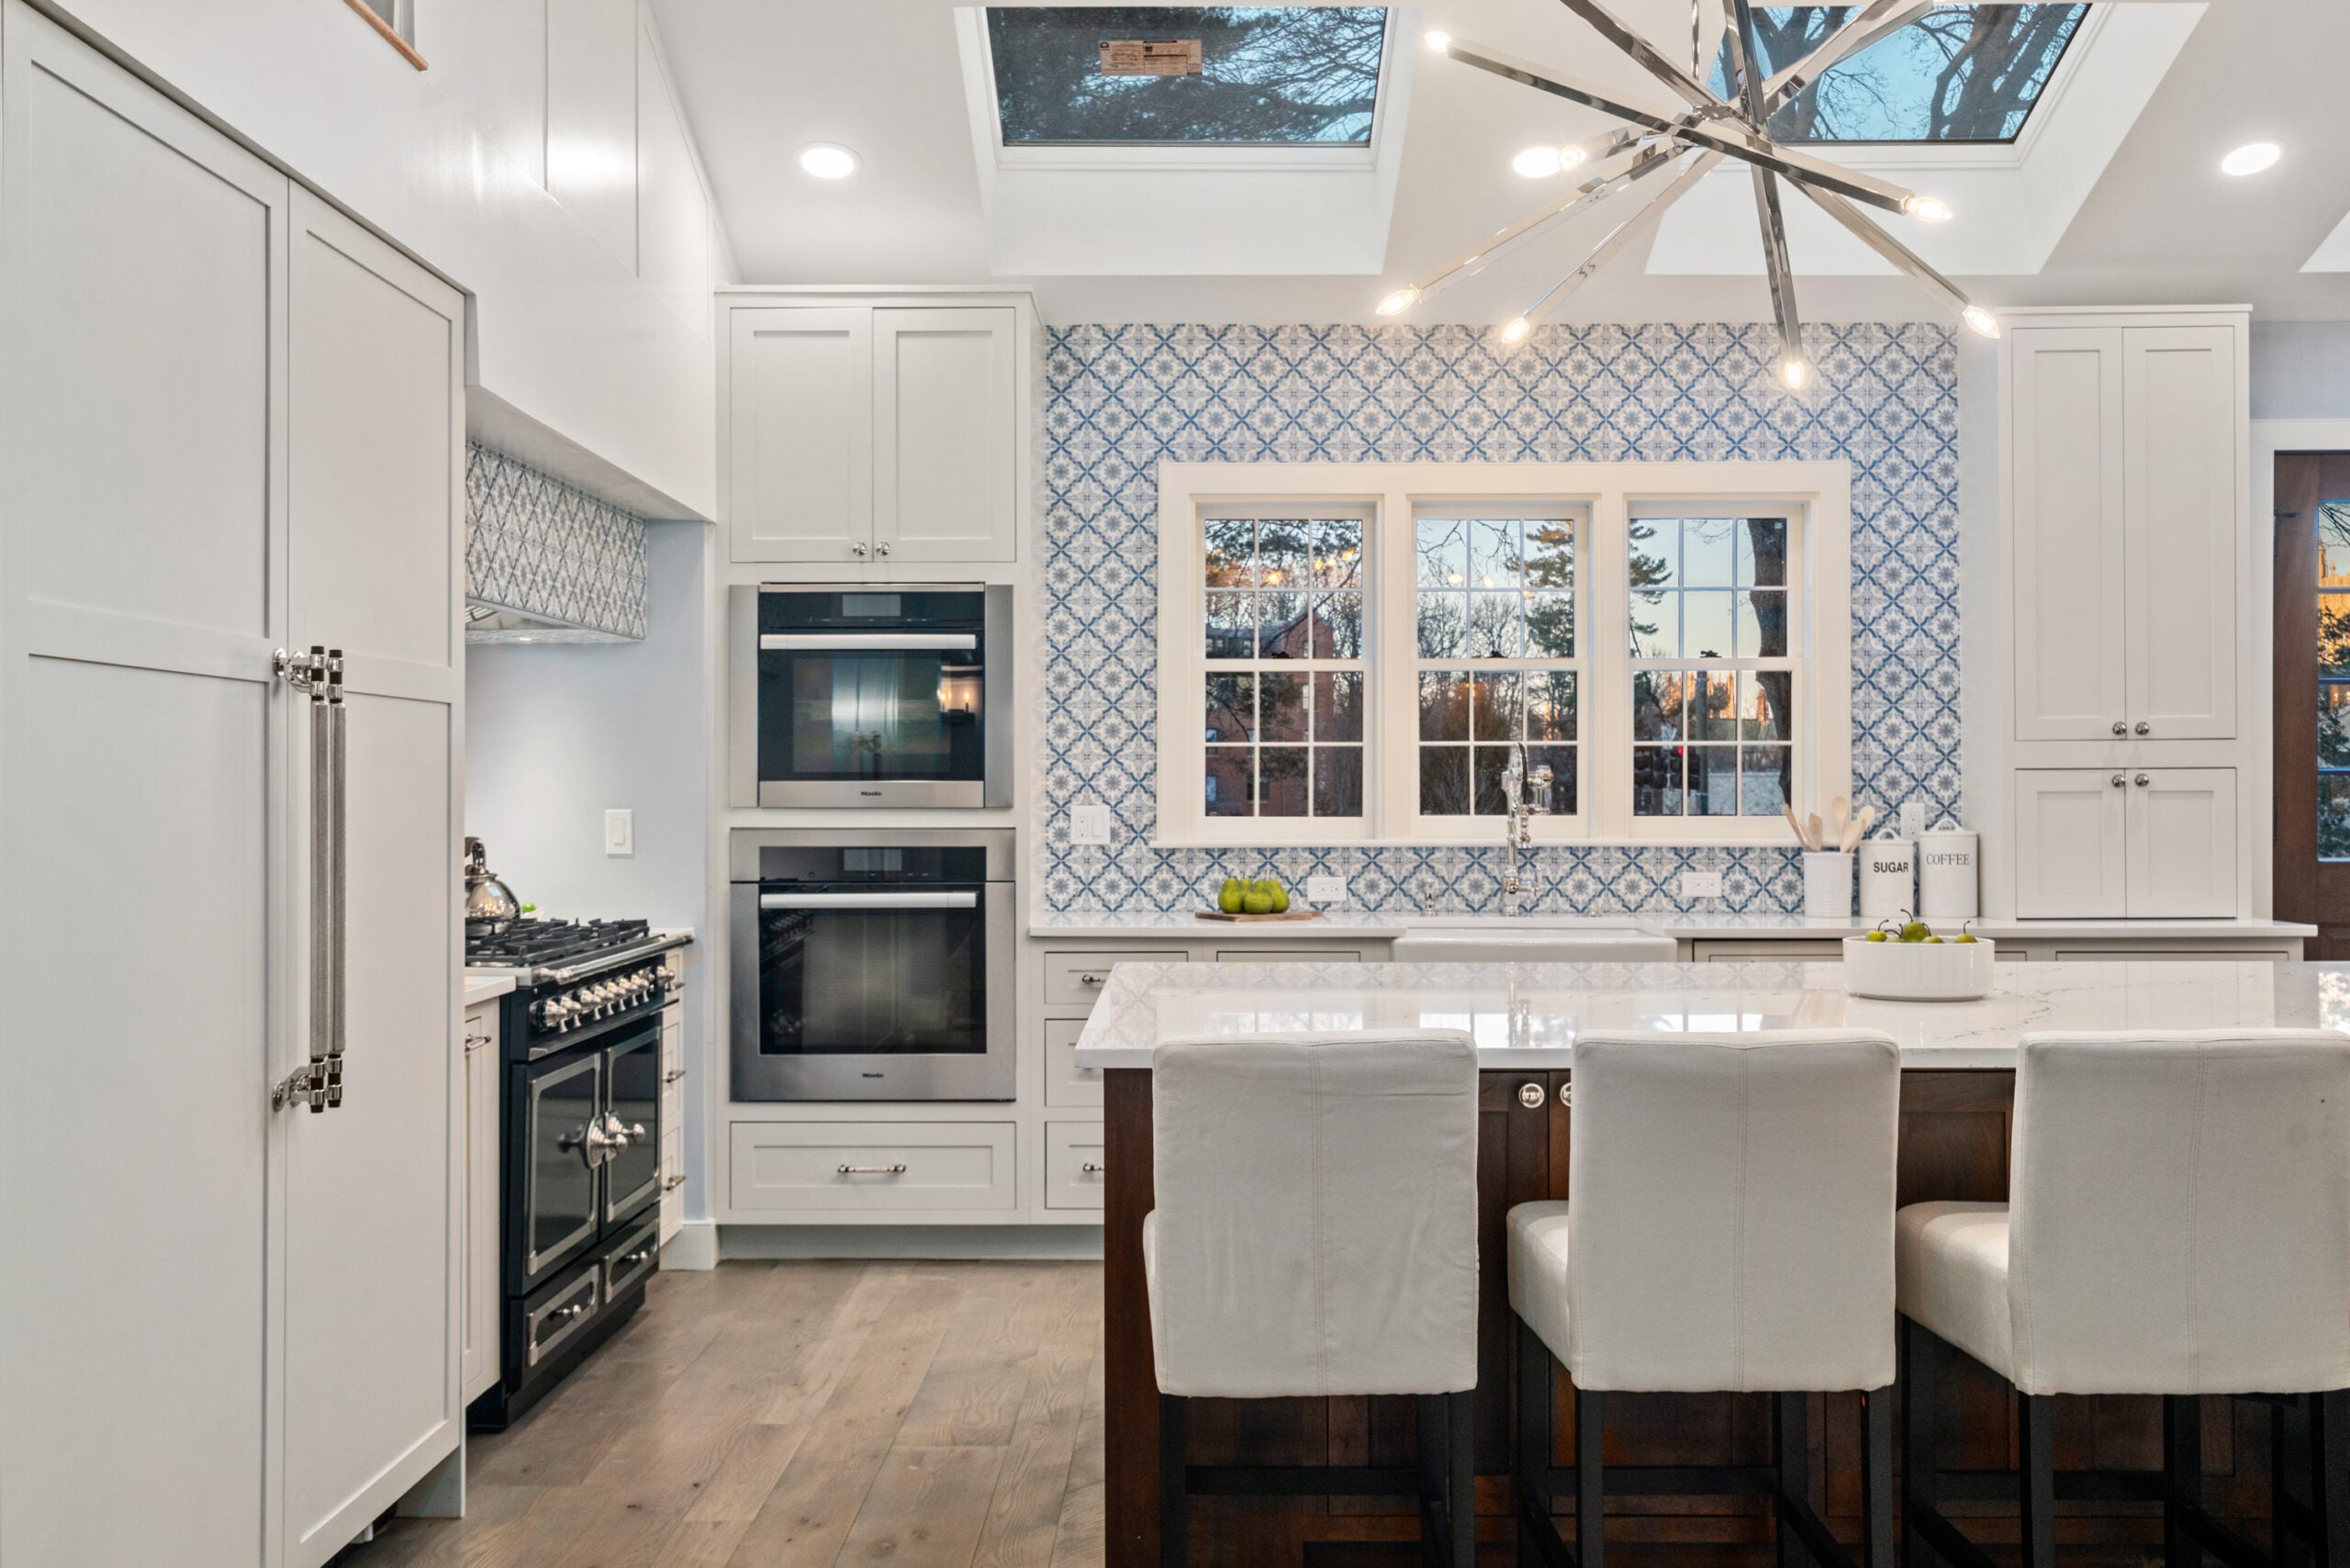 The kitchen has skylights, a sputnik chandelier, and white Shaker-Style cabinets.